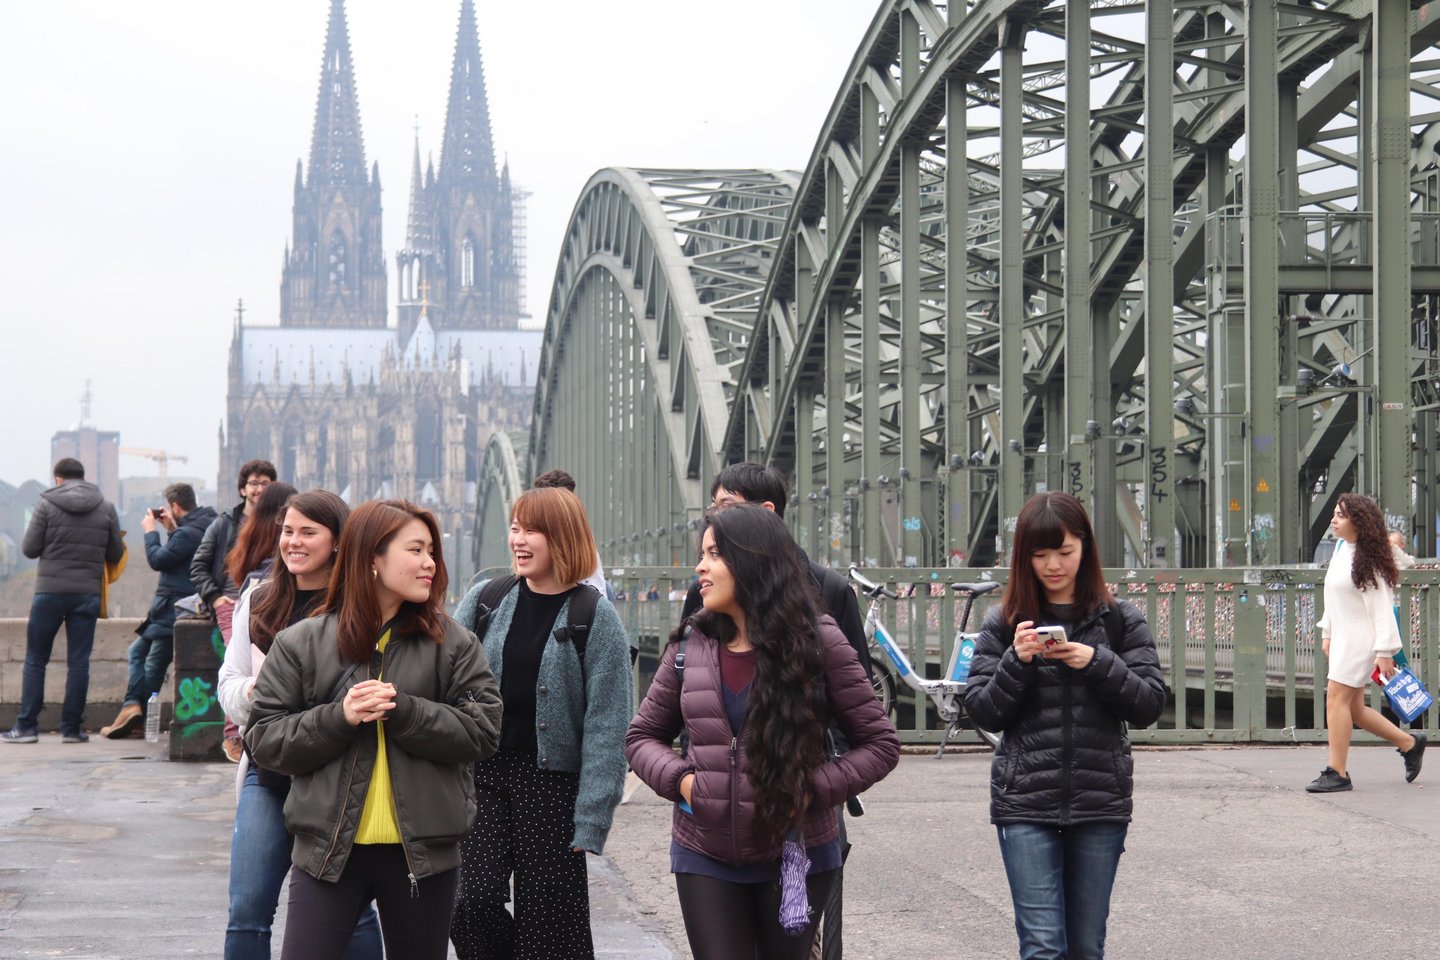 Few students in front of the Hohenzollern bridge with the cologne cathedral in the background.